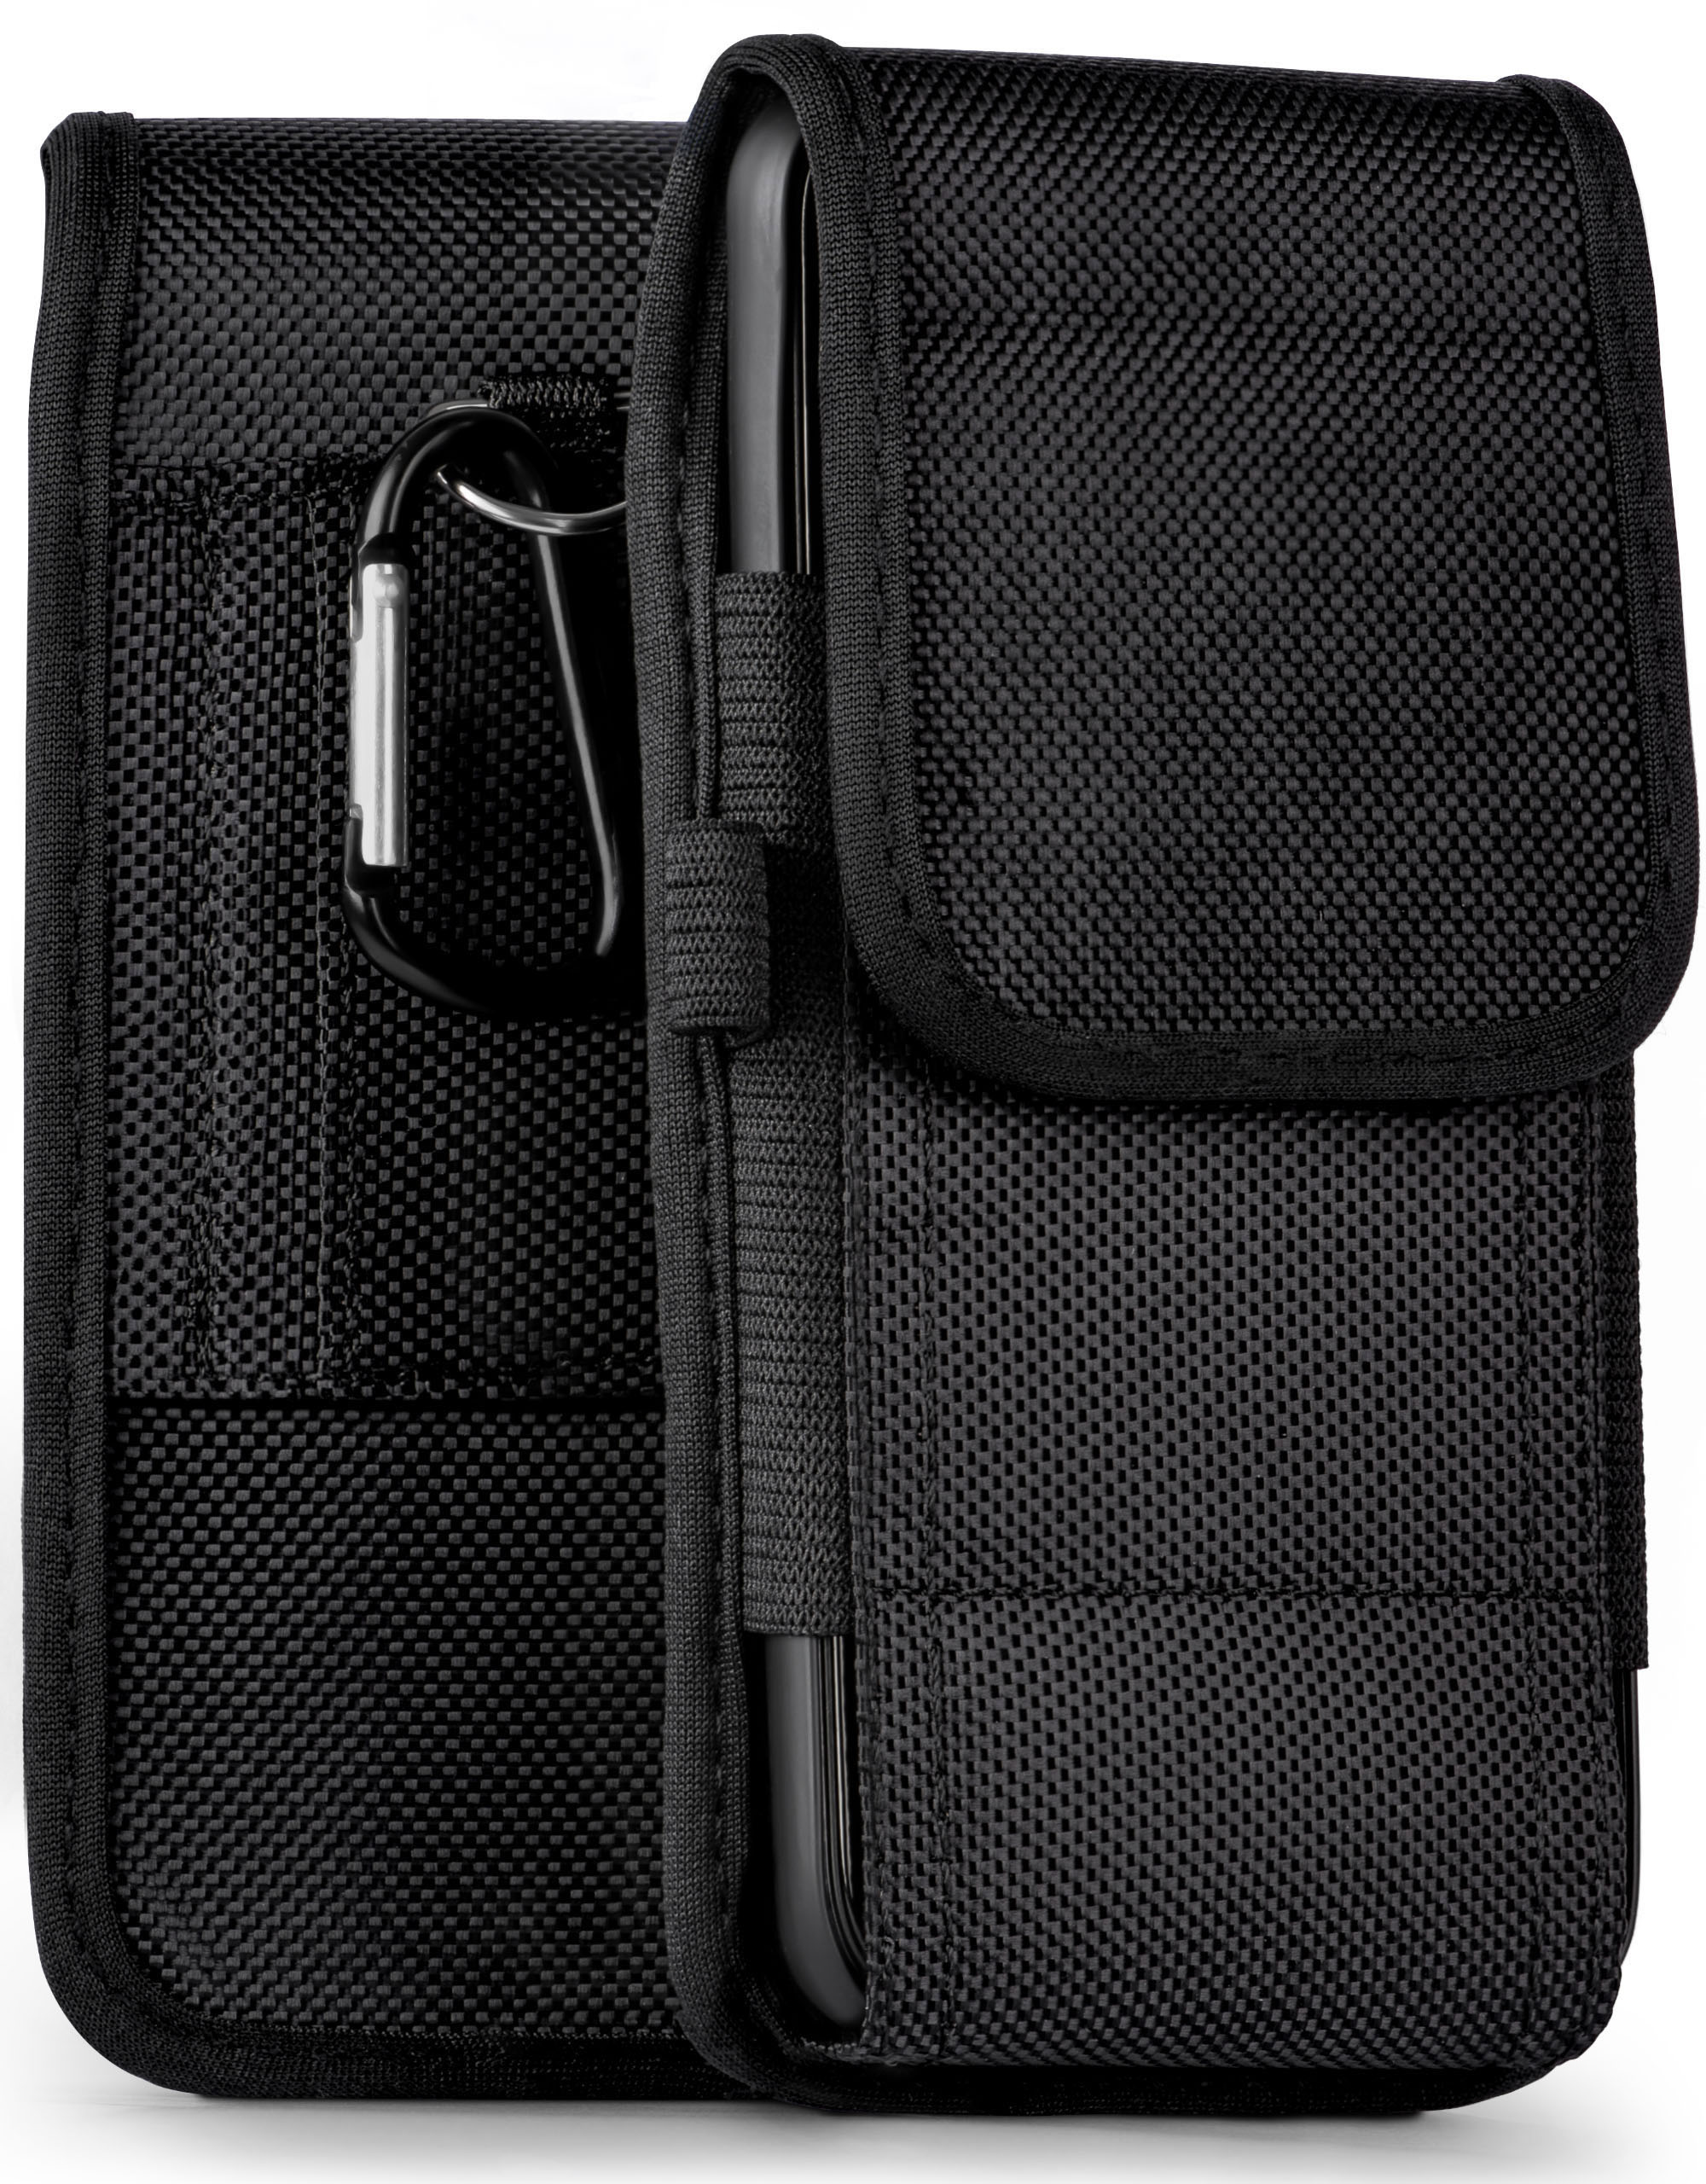 Case, Holster, / MOEX Gigaset, Plus, GS370 GS370 Agility Trail